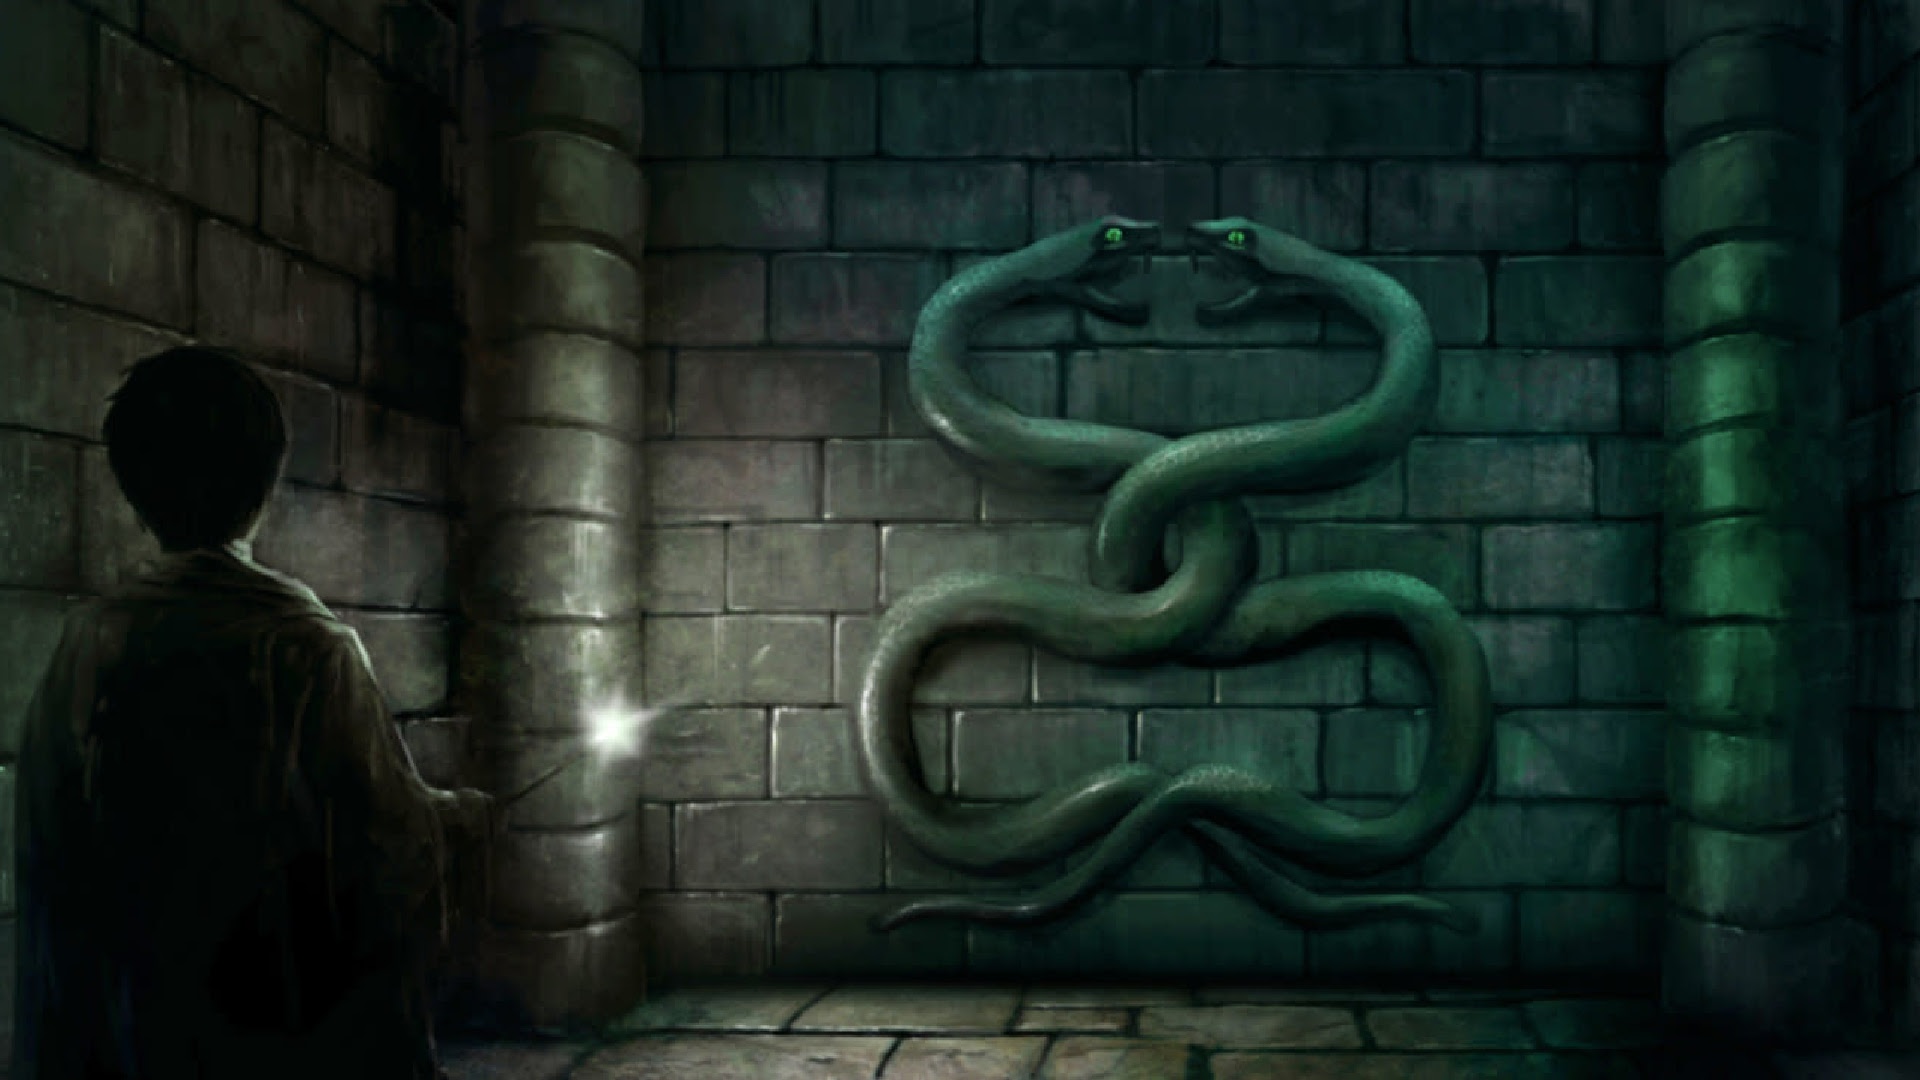 for apple download Harry Potter and the Chamber of Secrets